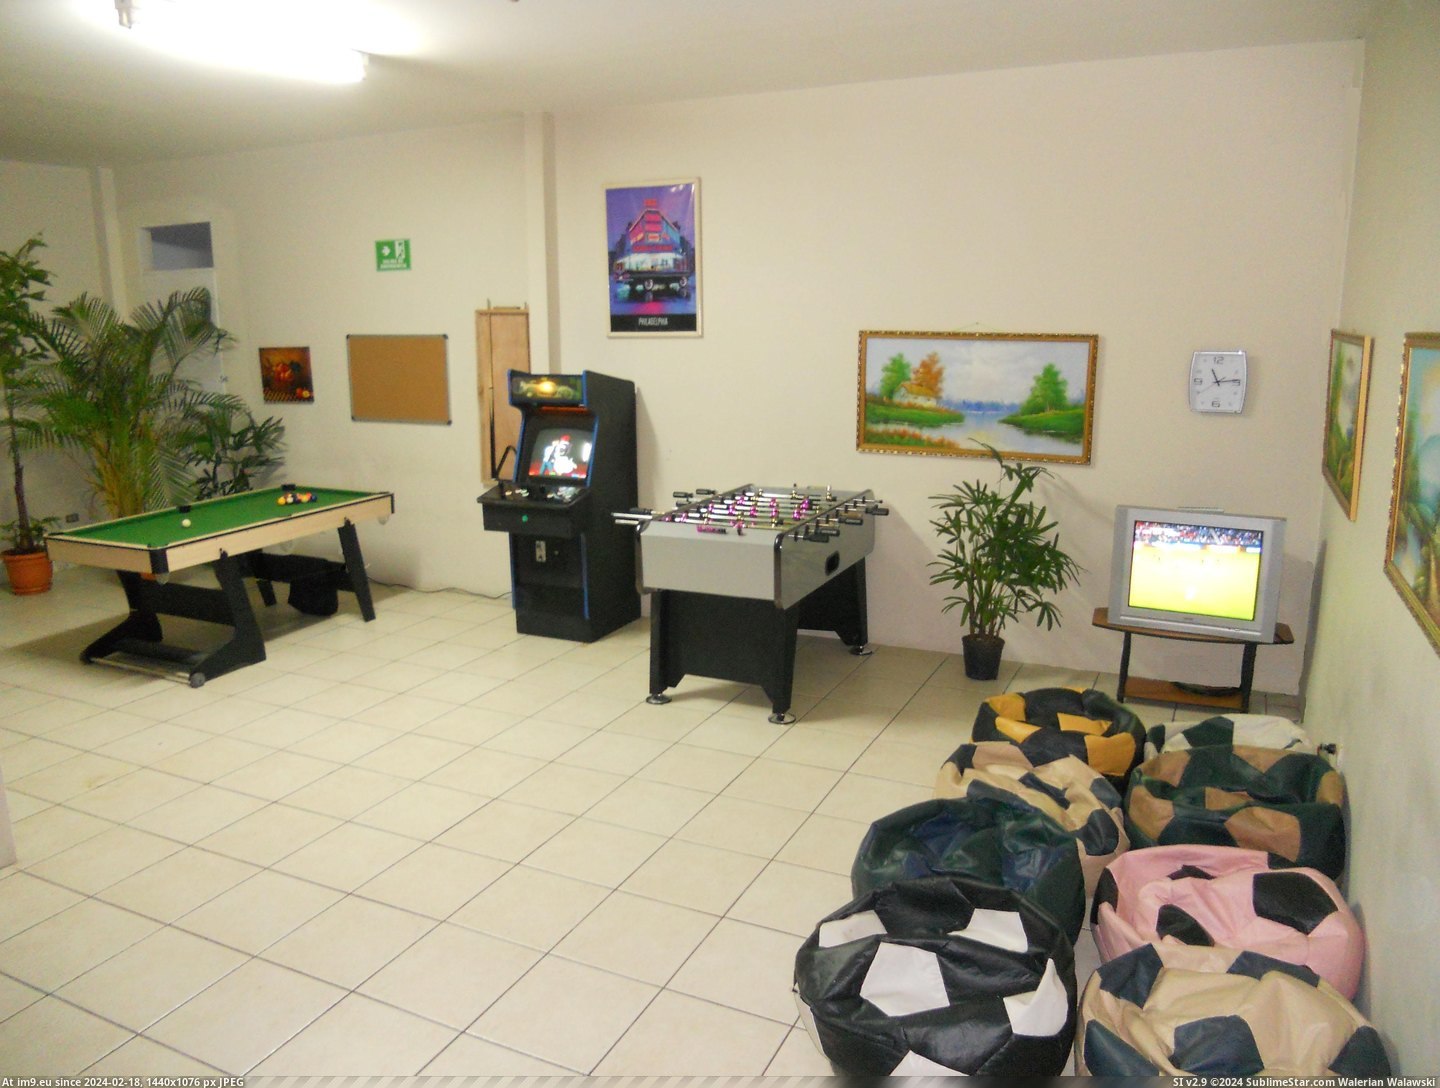 #Game #Designs #Centre #Room CONTACT CENTRE GAME ROOM DESIGNS 2010 Pic. (Bild von album BEST BOSS SUPPORTS EMPLOYEE GAME ROOM VIDEO ARCADE))